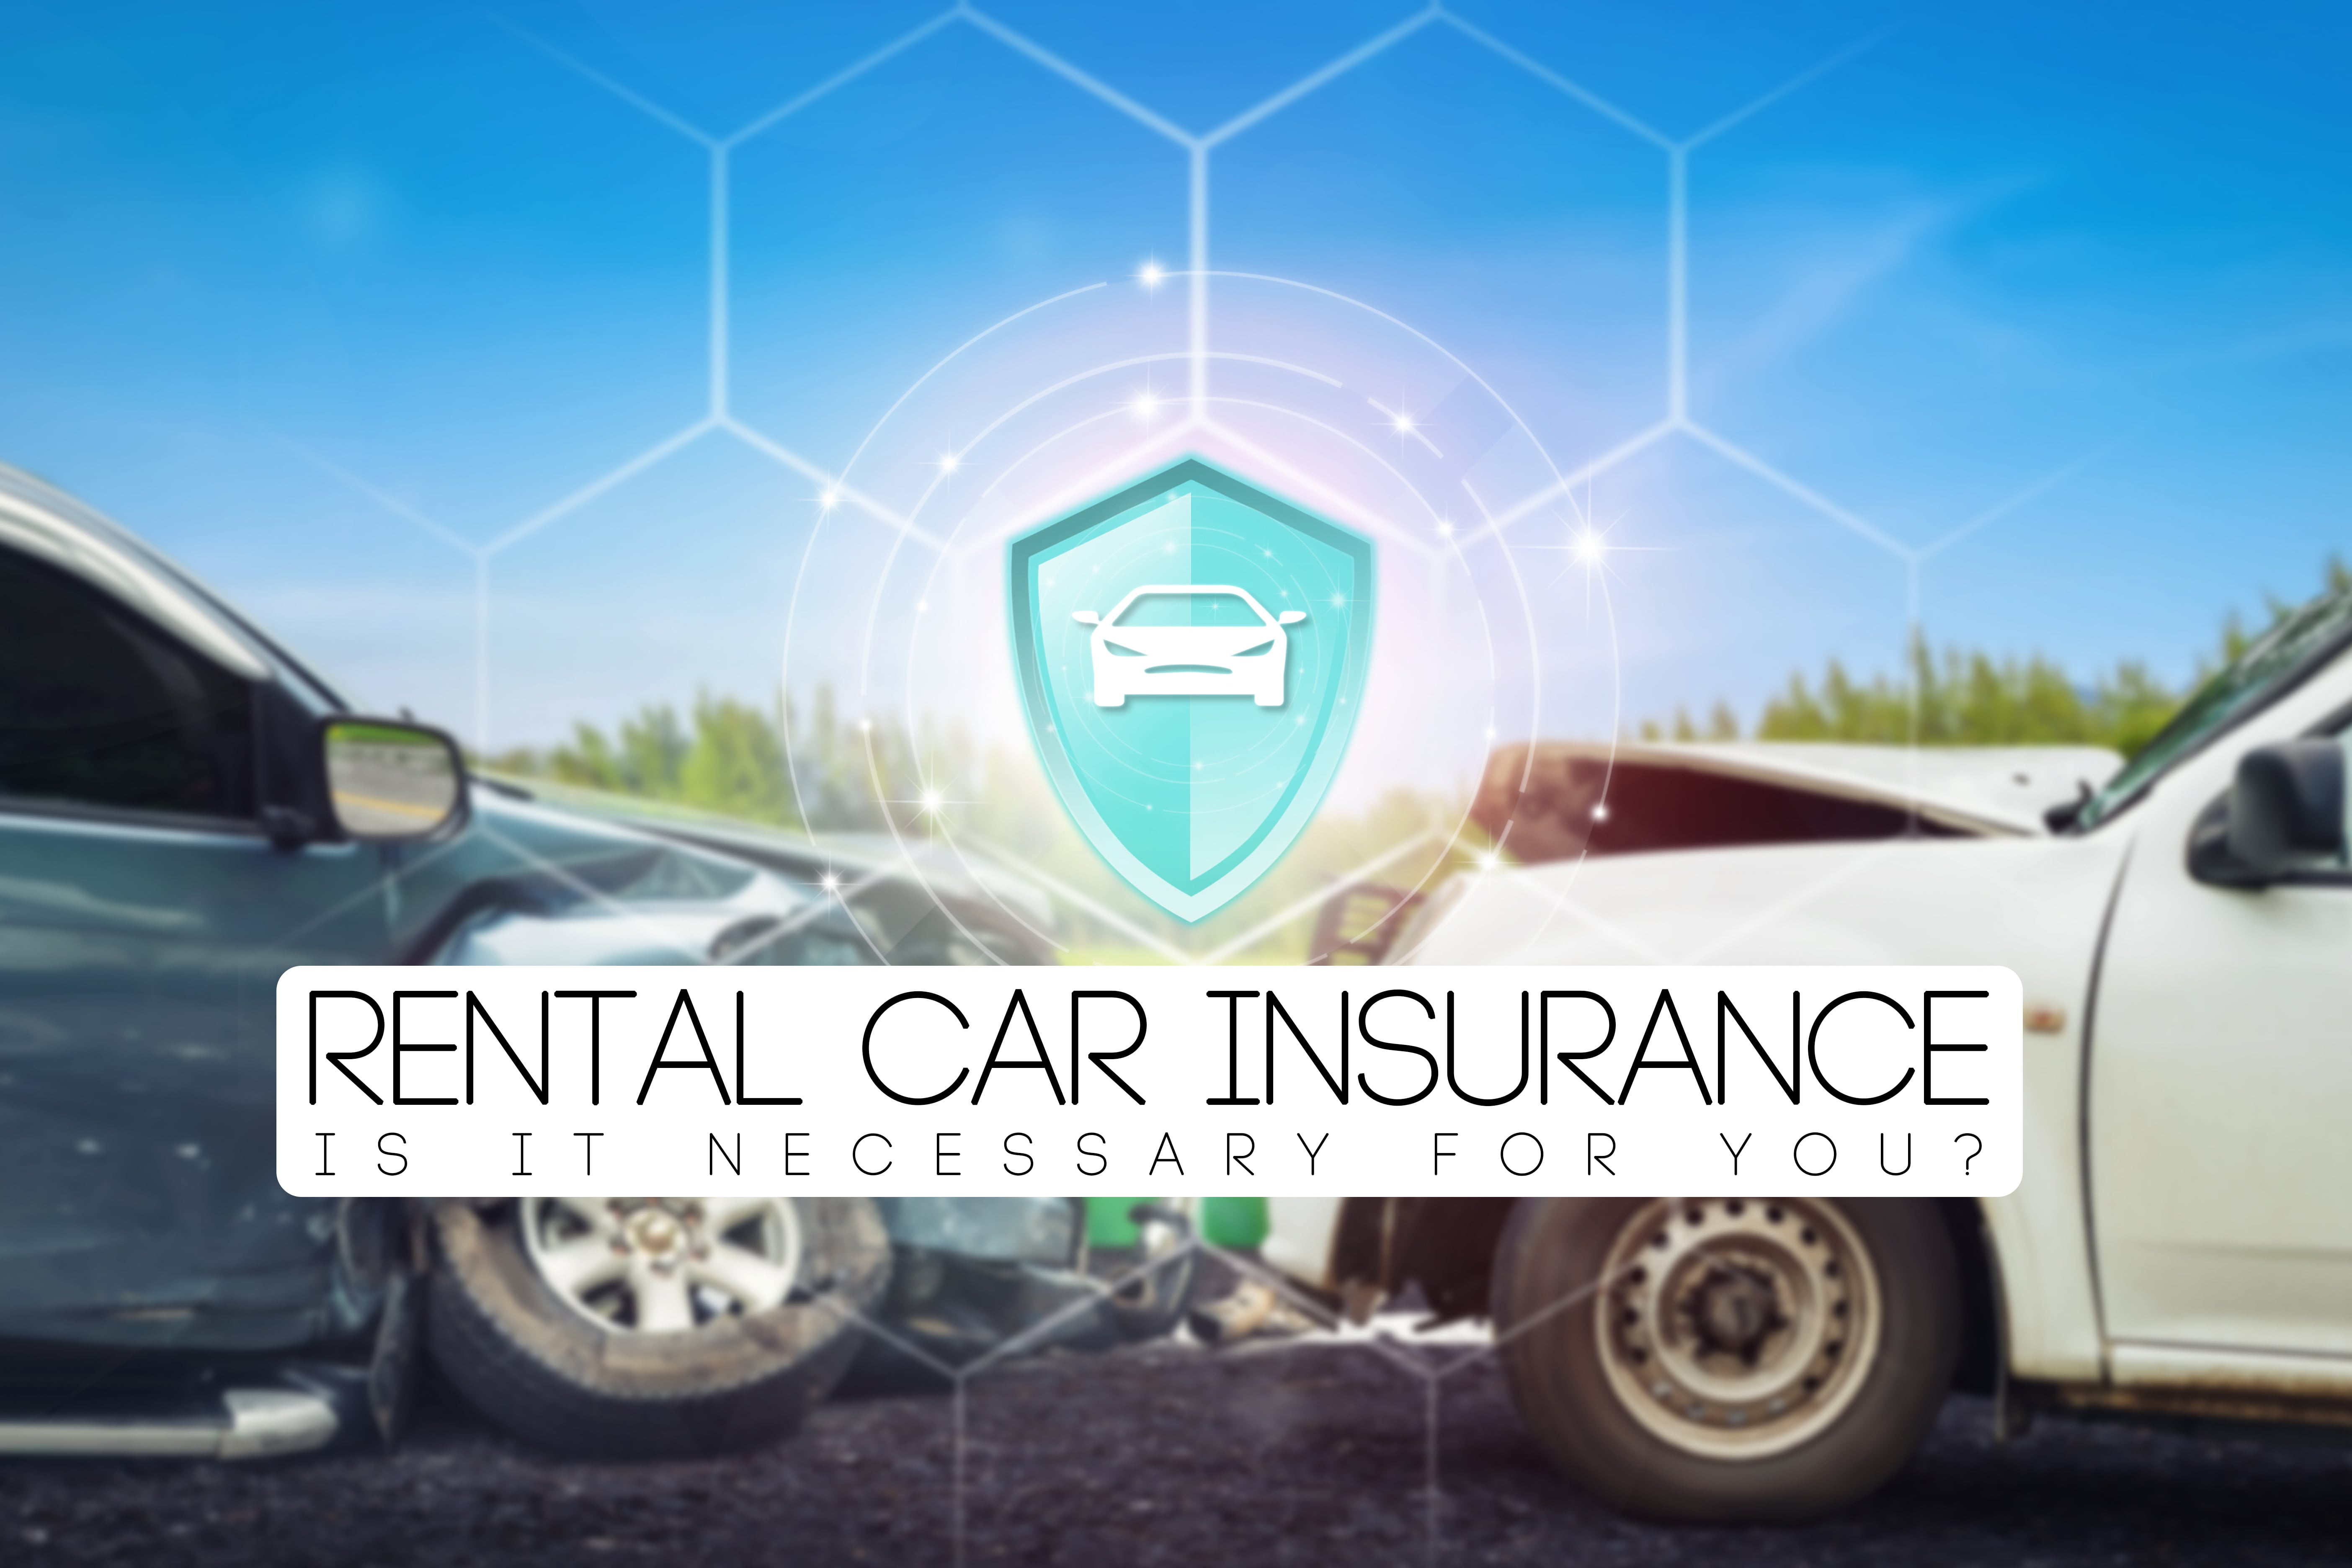 when renting a car do you need to buy the insurance